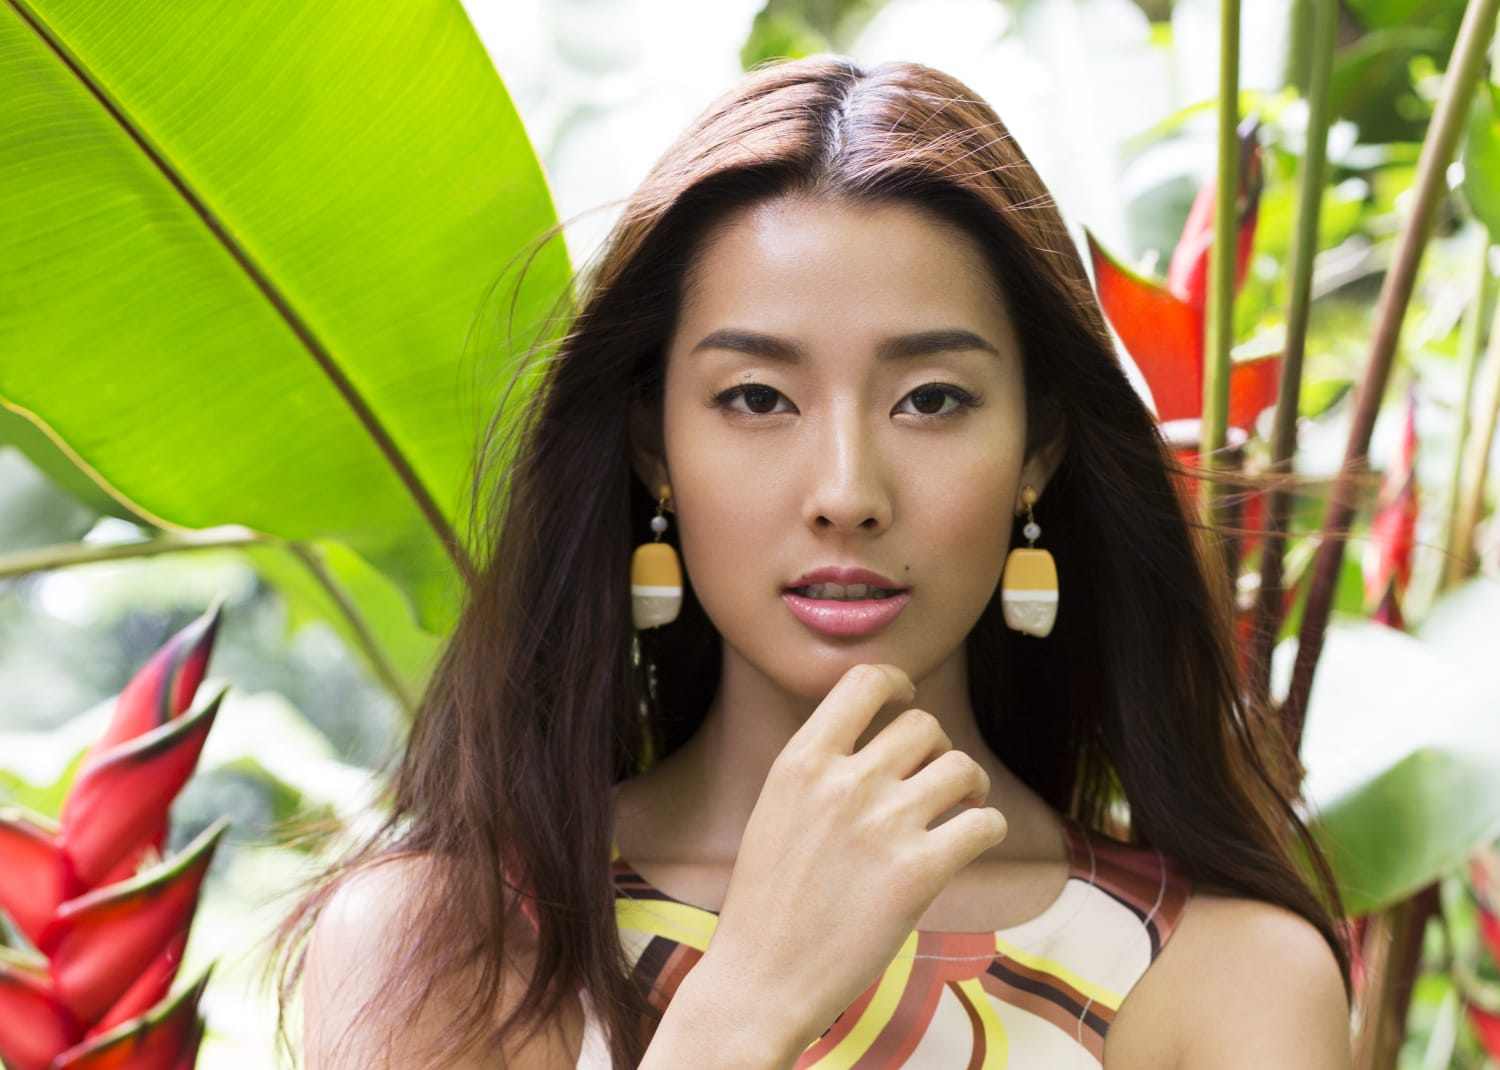 Finding My Way Sumire Matsubara On Acting Diversity And Connecting With Her Roots